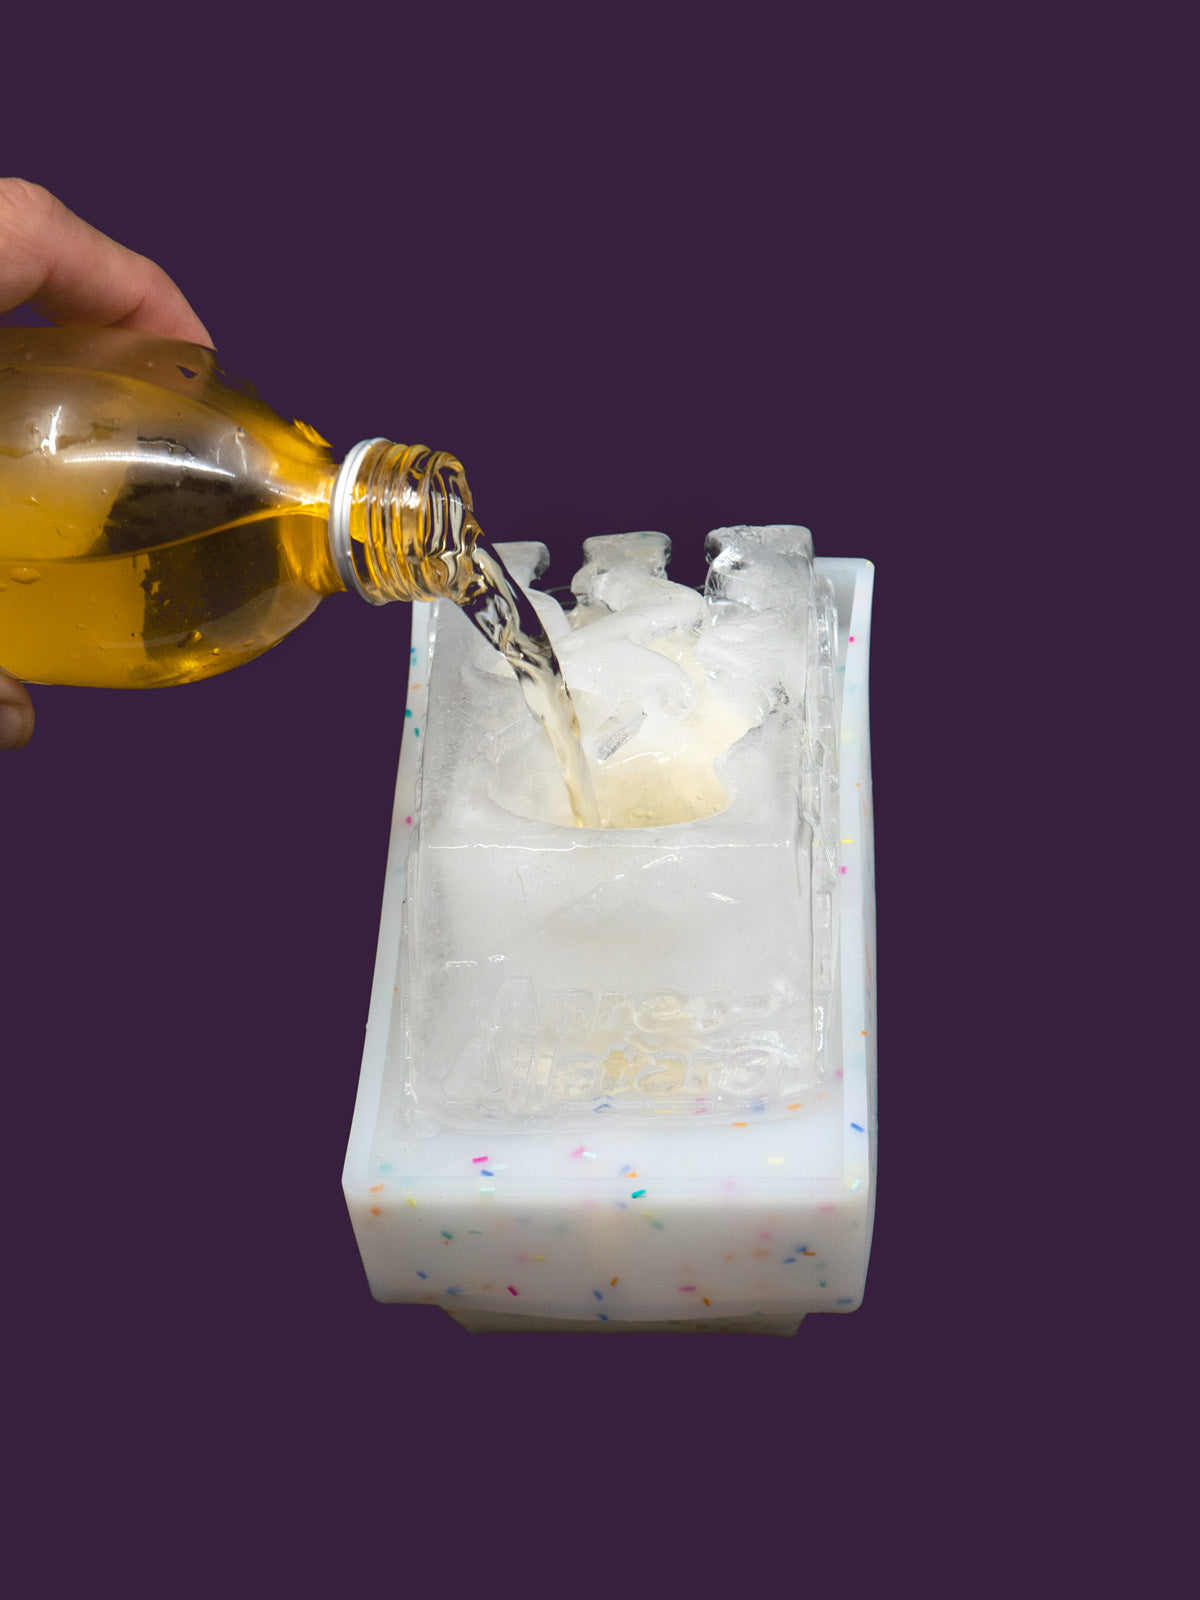 Photo of a white speckled plastic mould, with a block of ice on top that has been molded in the shape of a slalom slope, with 2 funnels within the ice through which yellow liquor is poured to chill it. The yellow liquor runs through the ice and into waiting shots glasses shaped like ski boots. The image is set against a purple backdrop, viewed from the back.